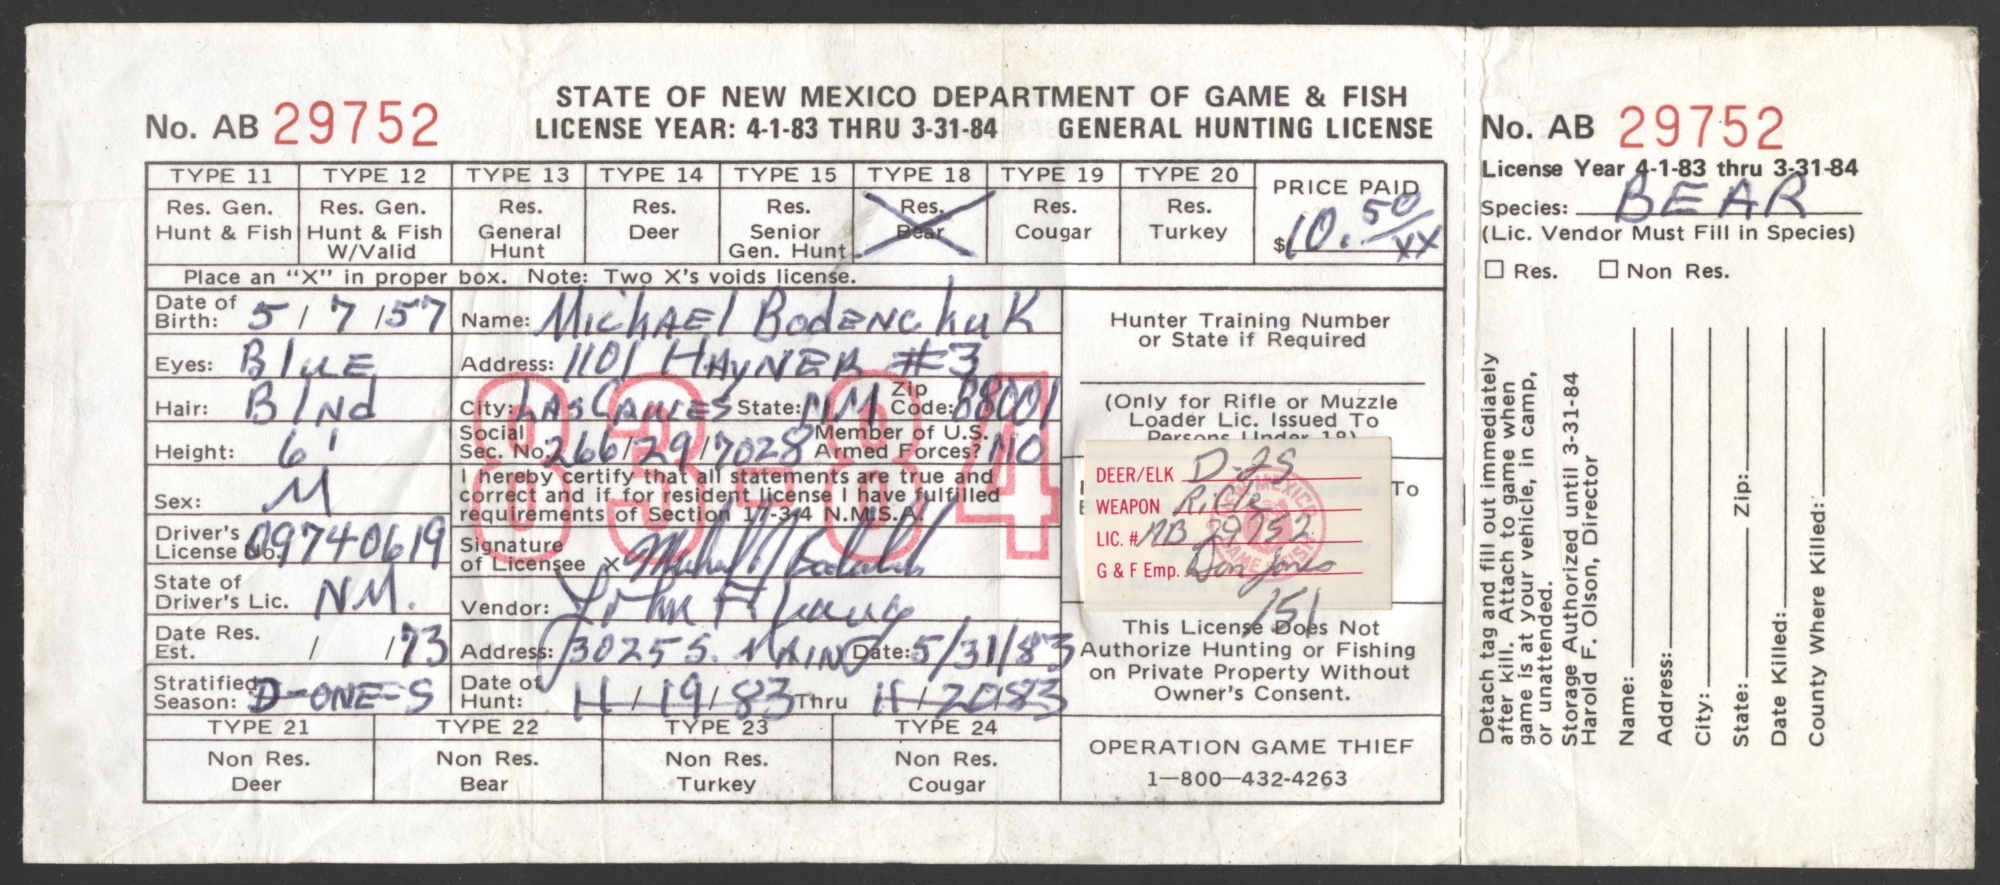 Mid 1980s New Mexico Stratified Season used on 1983-84 Resident Bear license